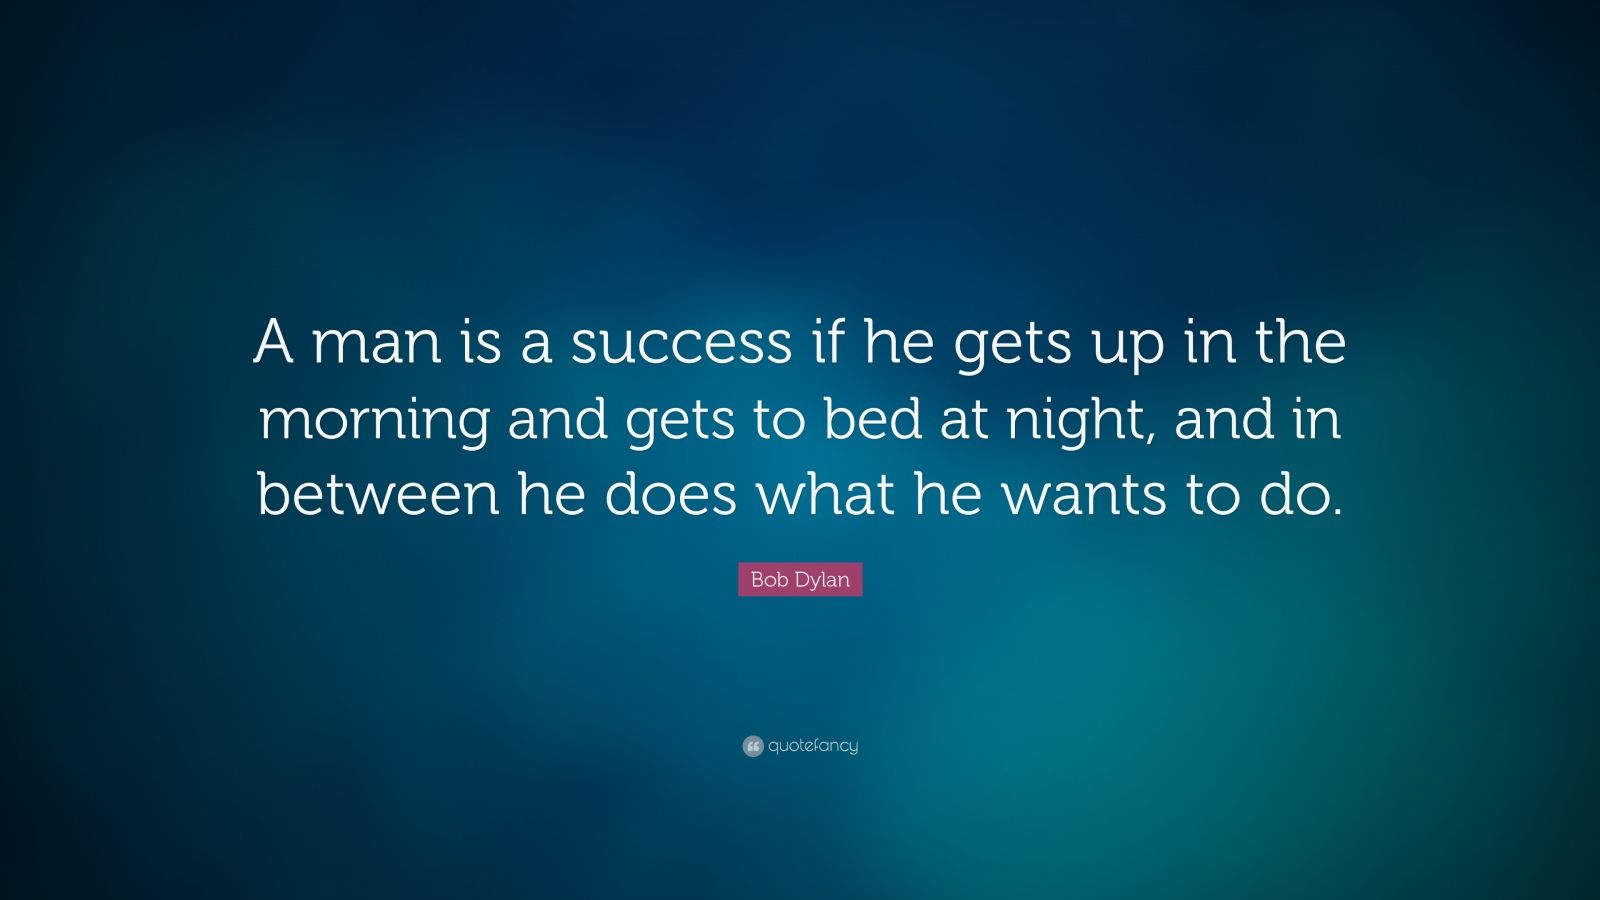 Bob Dylan Quote: “A man is a success if he gets up in the morning and ...